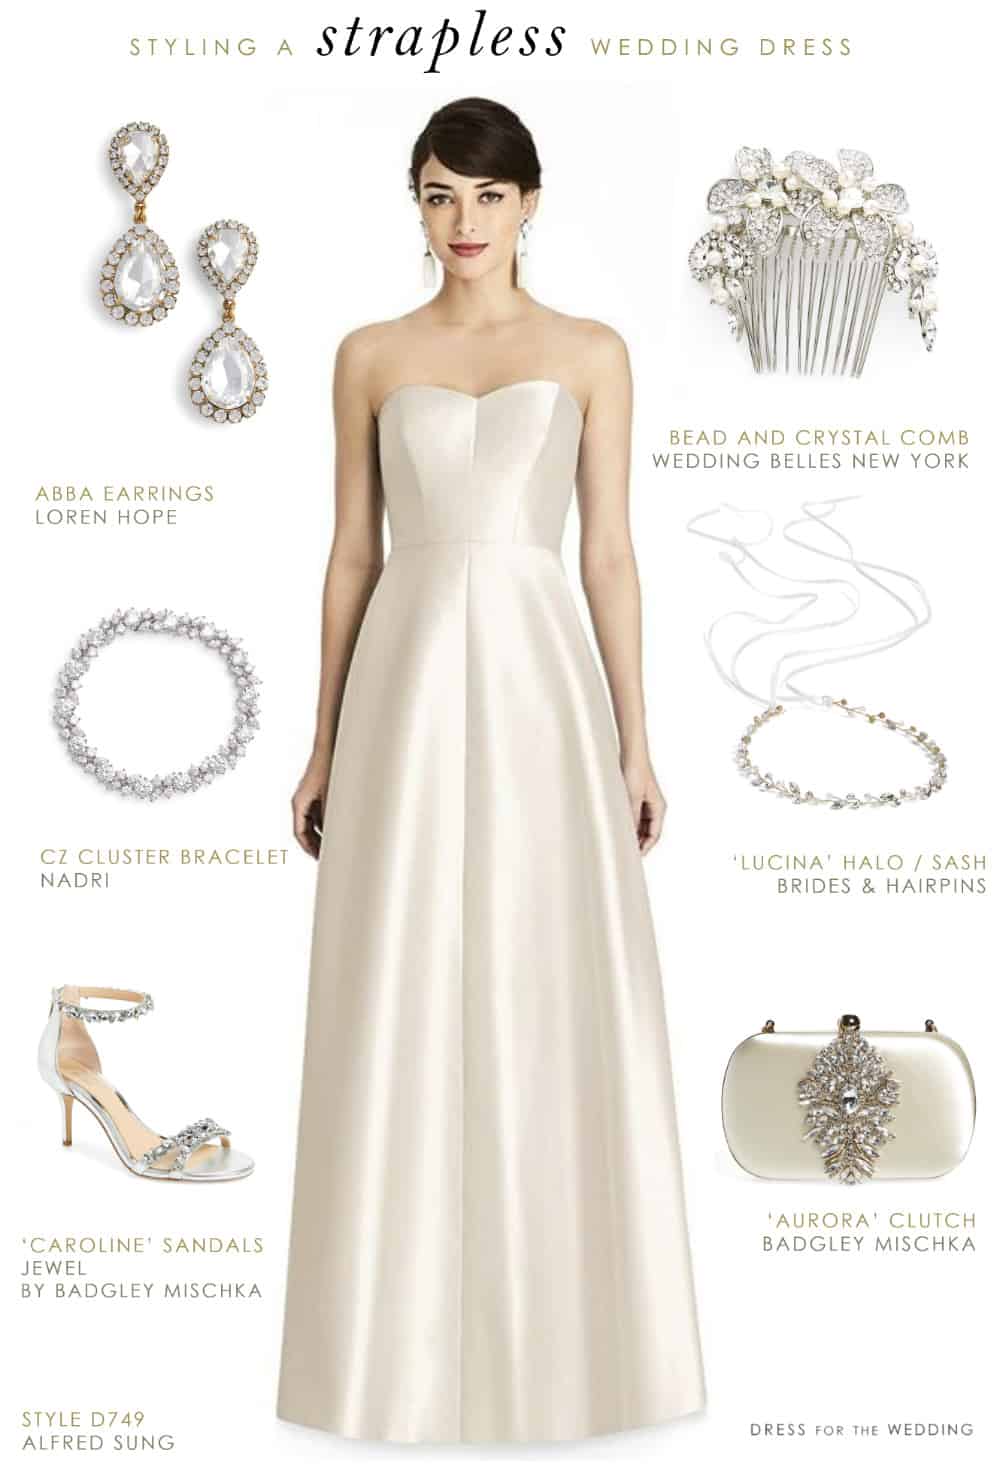 Styling Your Strapless Wedding Dress - Wilkins Bridal